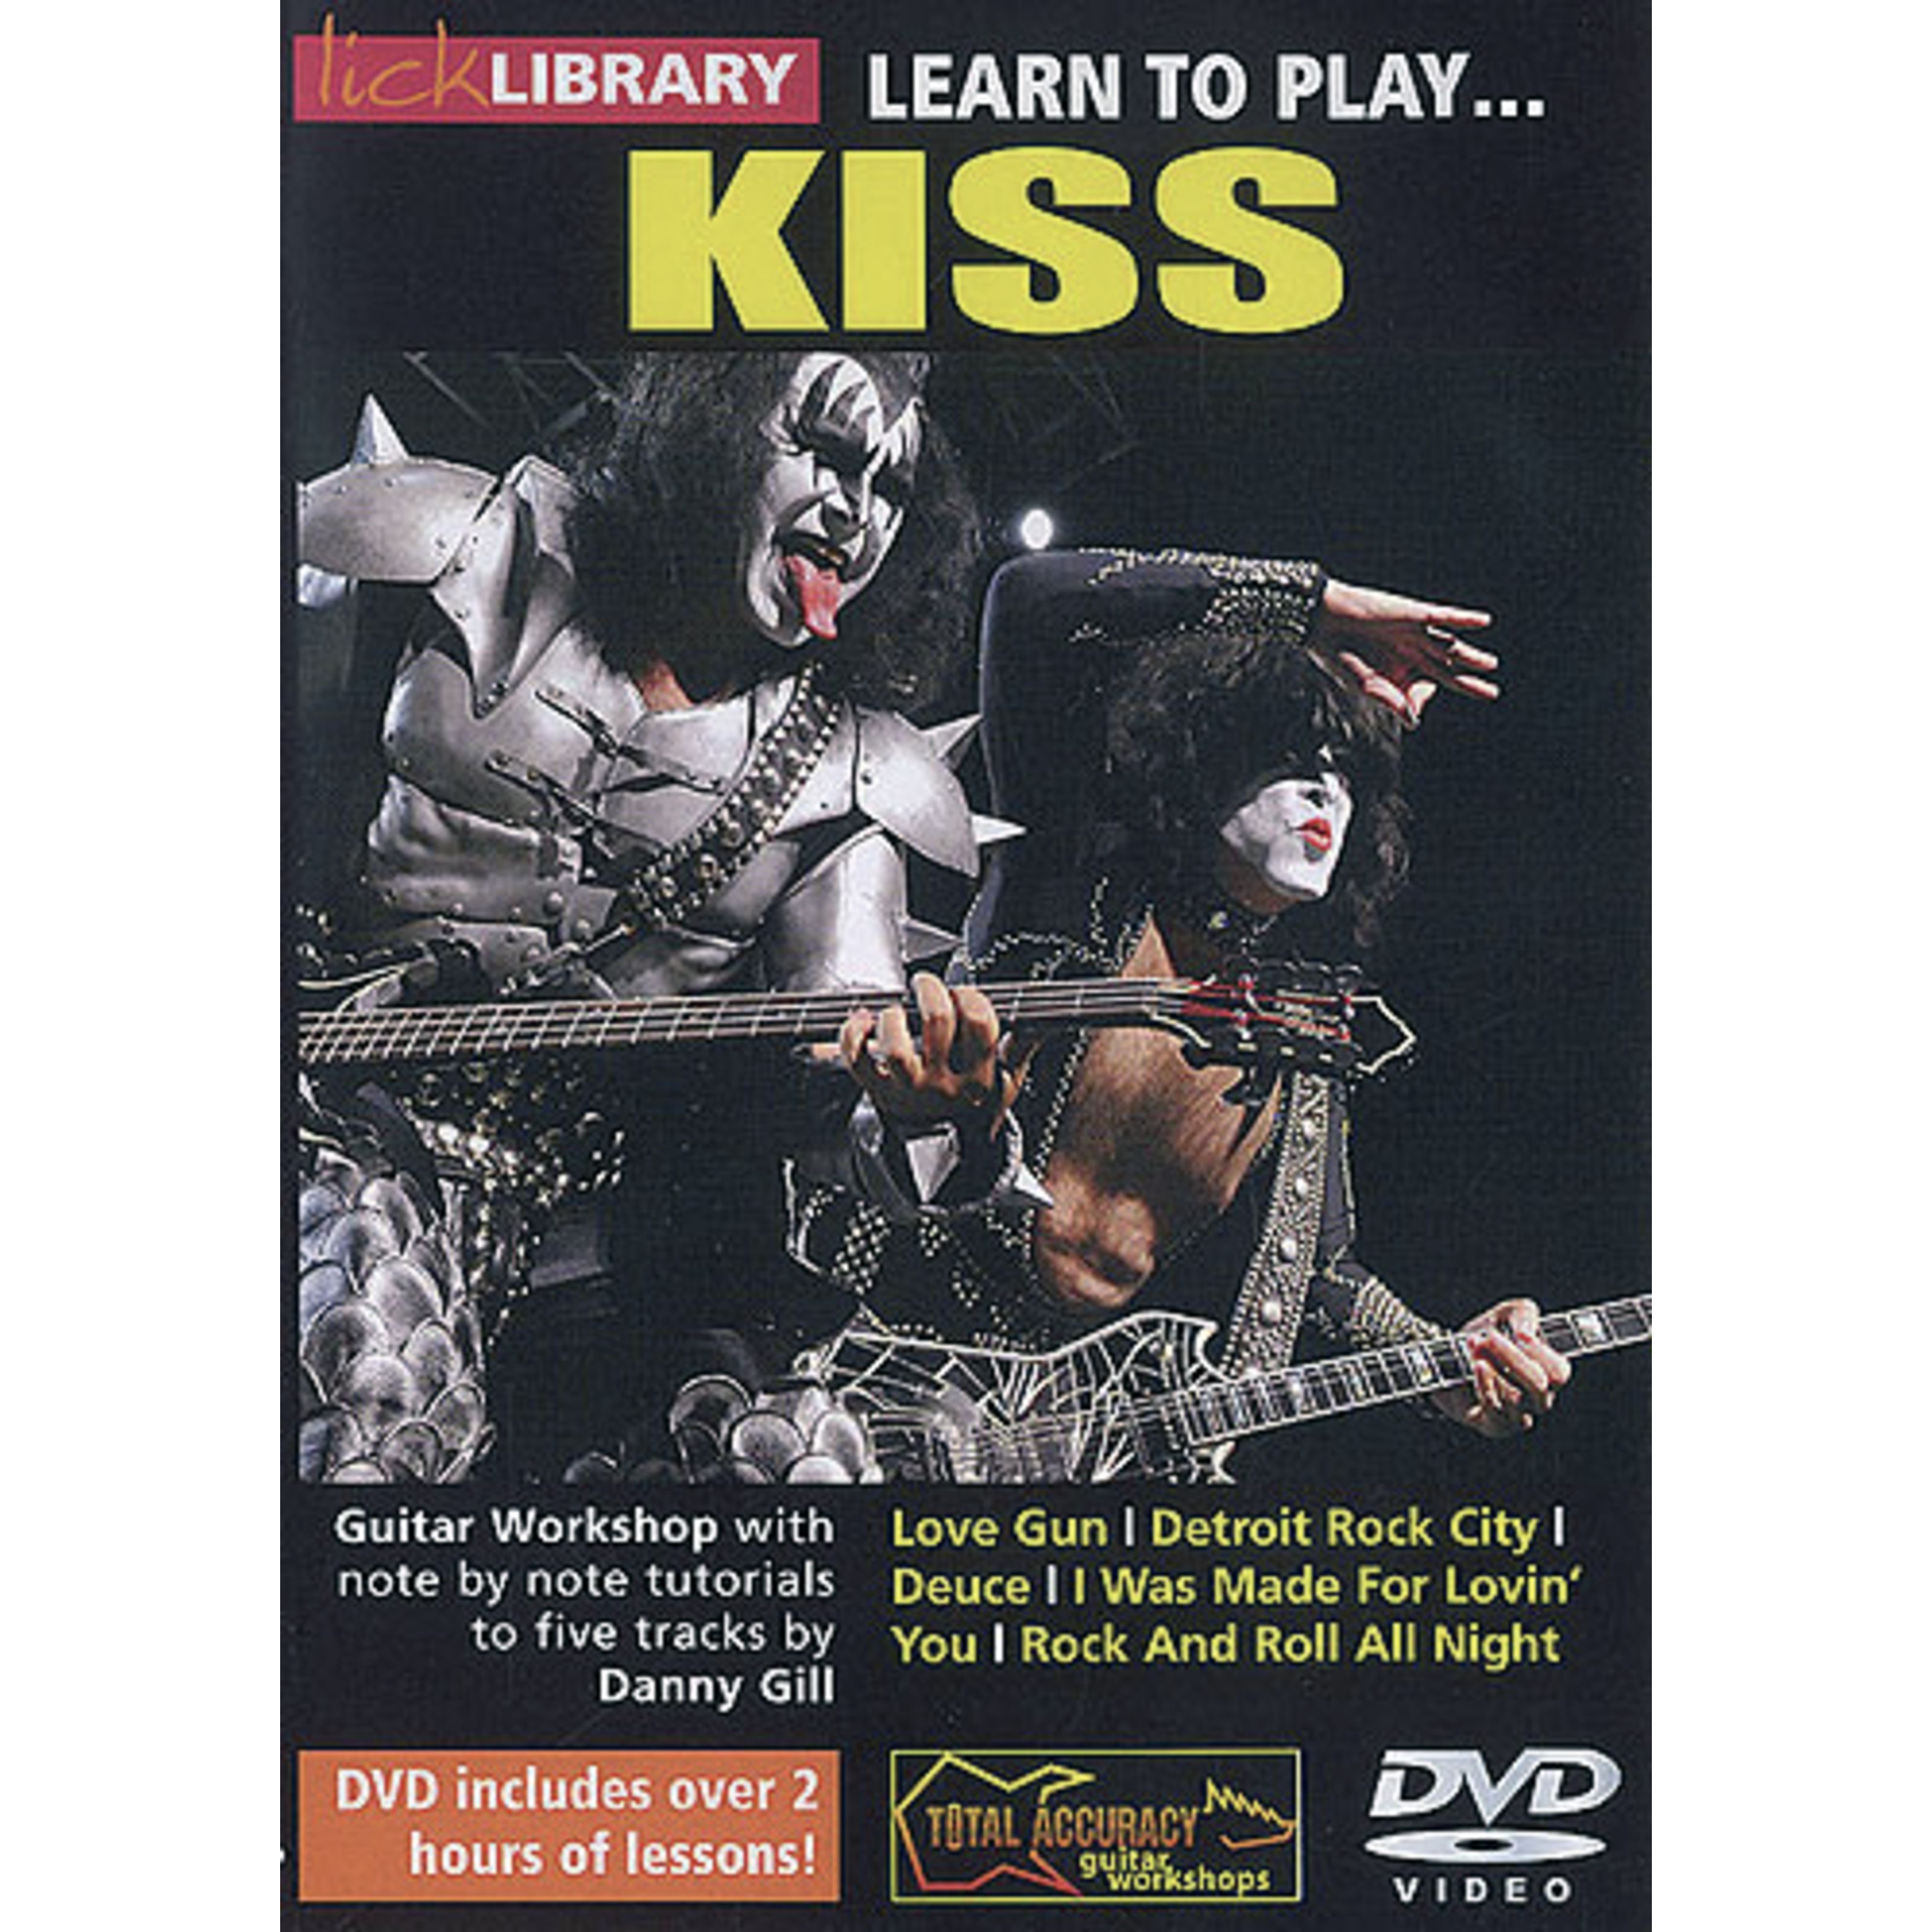 Roadrock International Lick Library: Learn To Play Kiss DVD - DVD